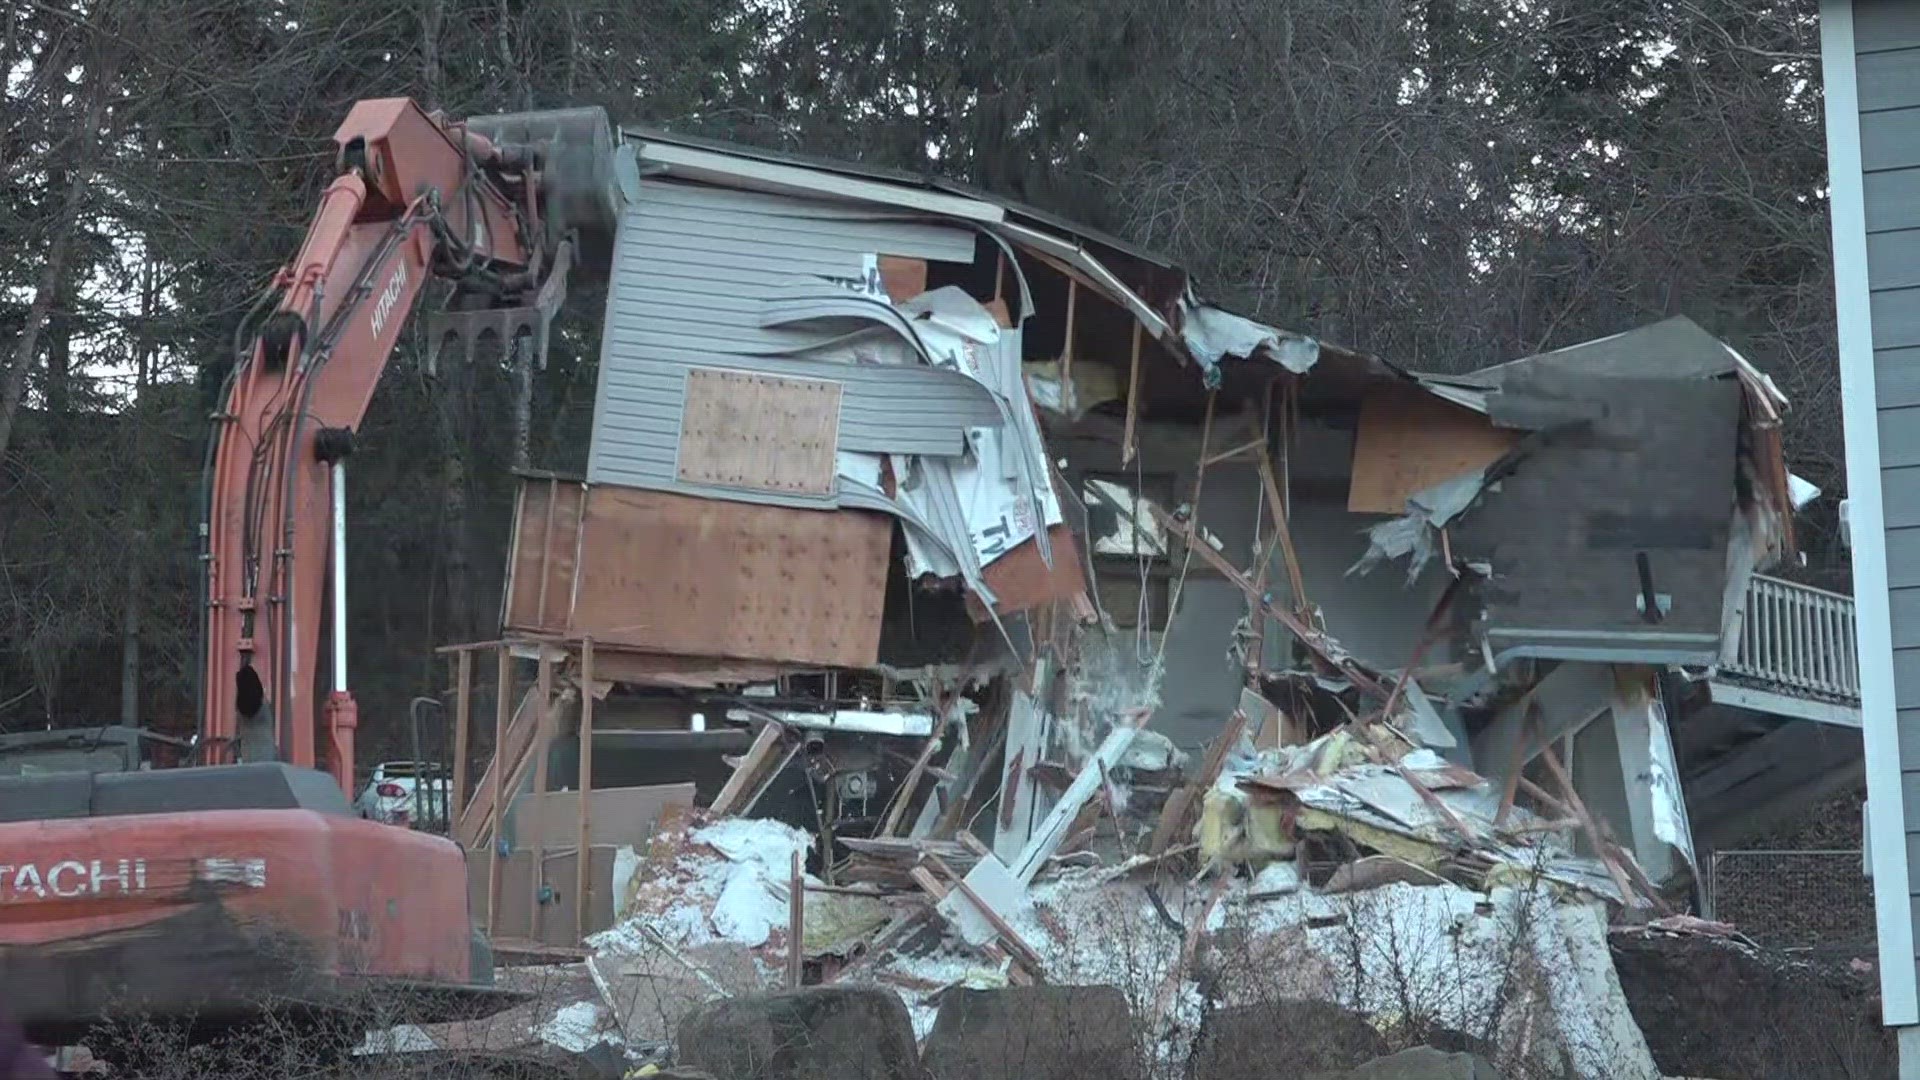 Crews demolished the house in Moscow, Idaho, where four University of Idaho students were brutally killed in 2022.